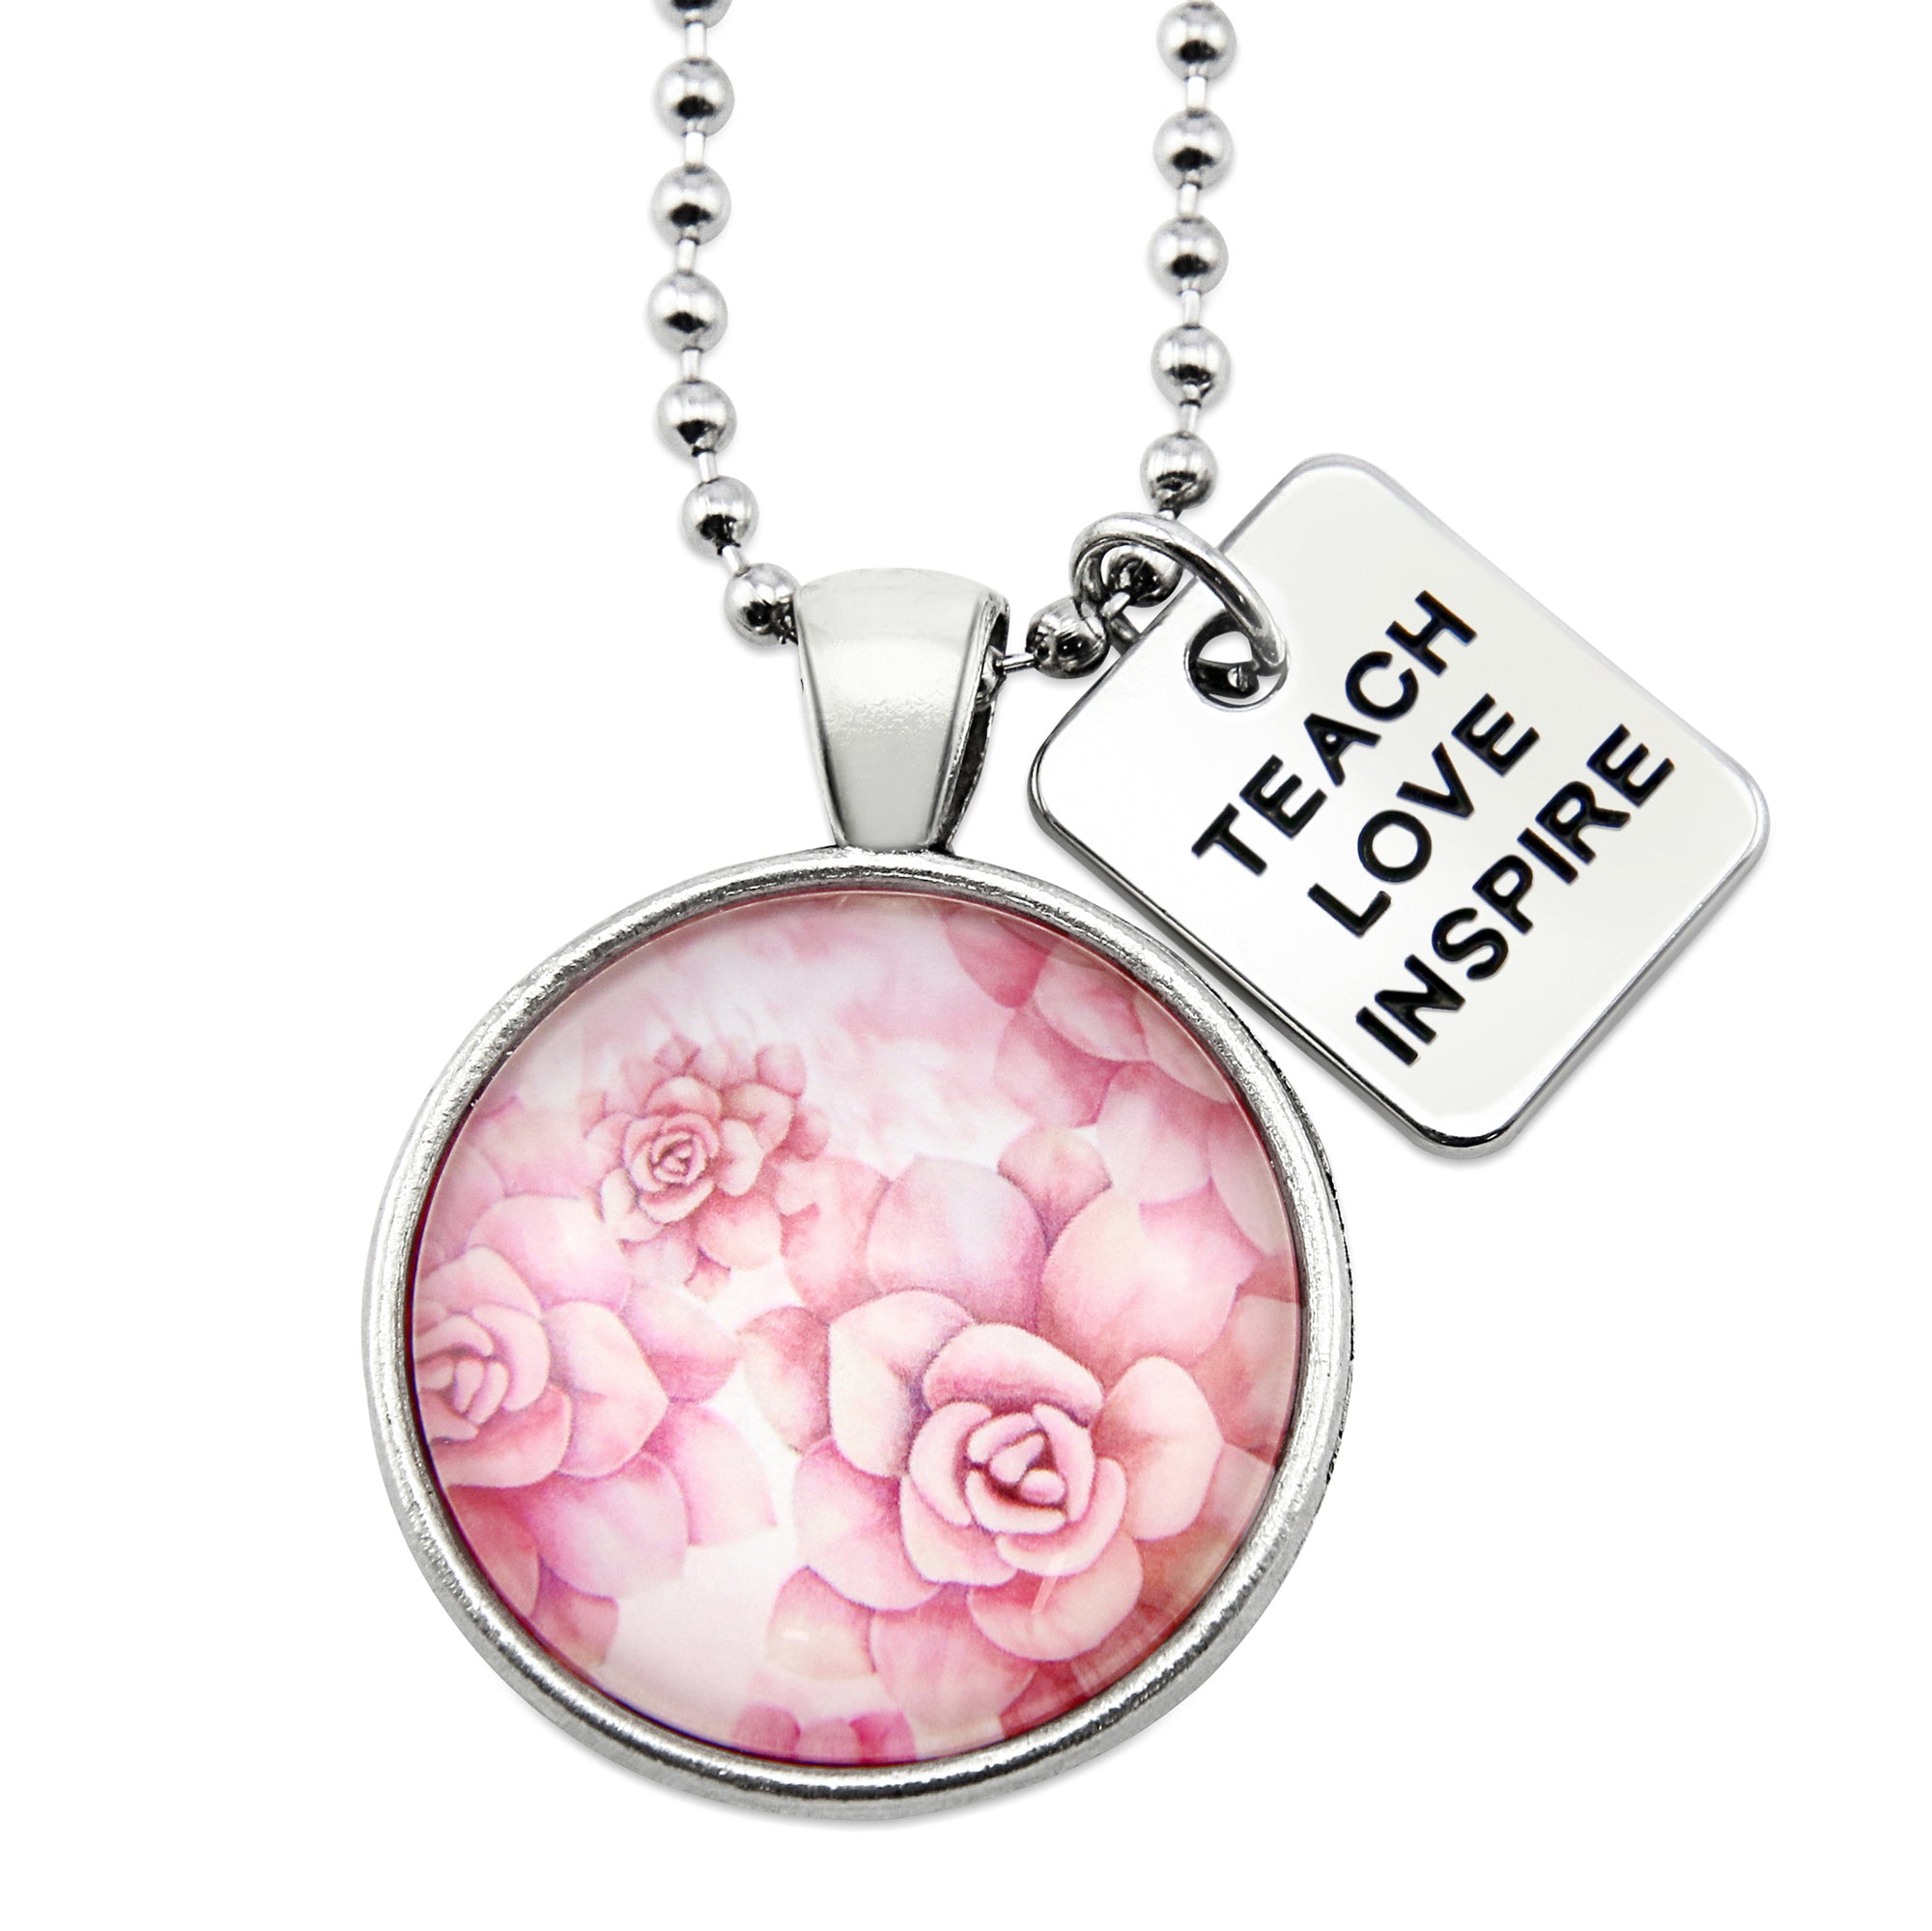 Vintage Silver Pendant ball chain necklace with silver teach love inspire charm and pink floral print.